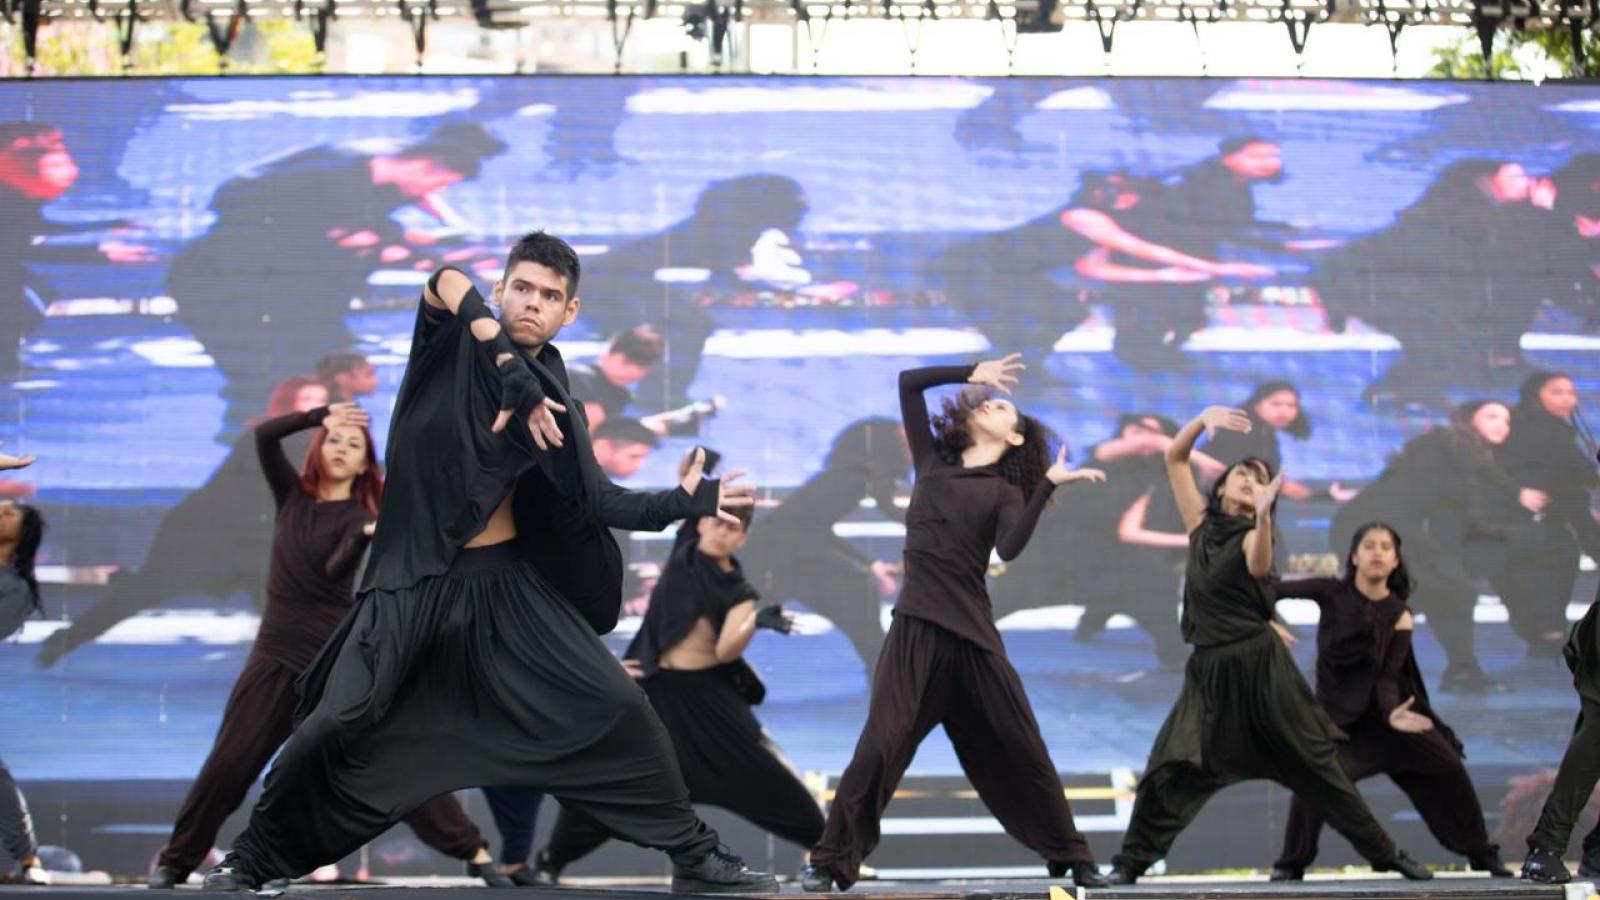 young dancers performing